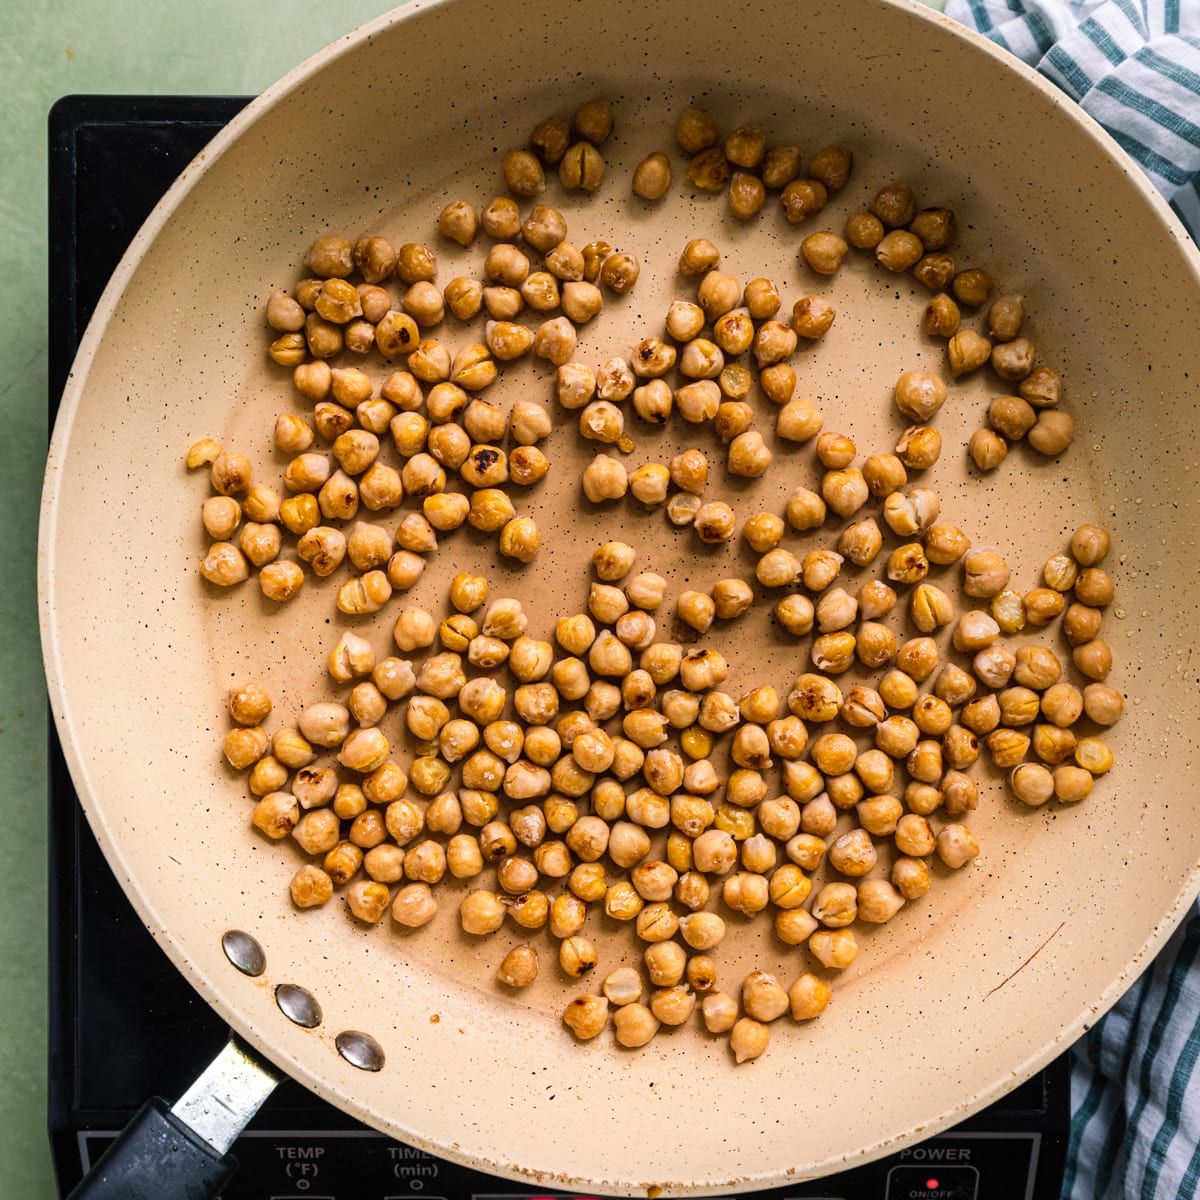 pan-frying chickpeas in a saute pan